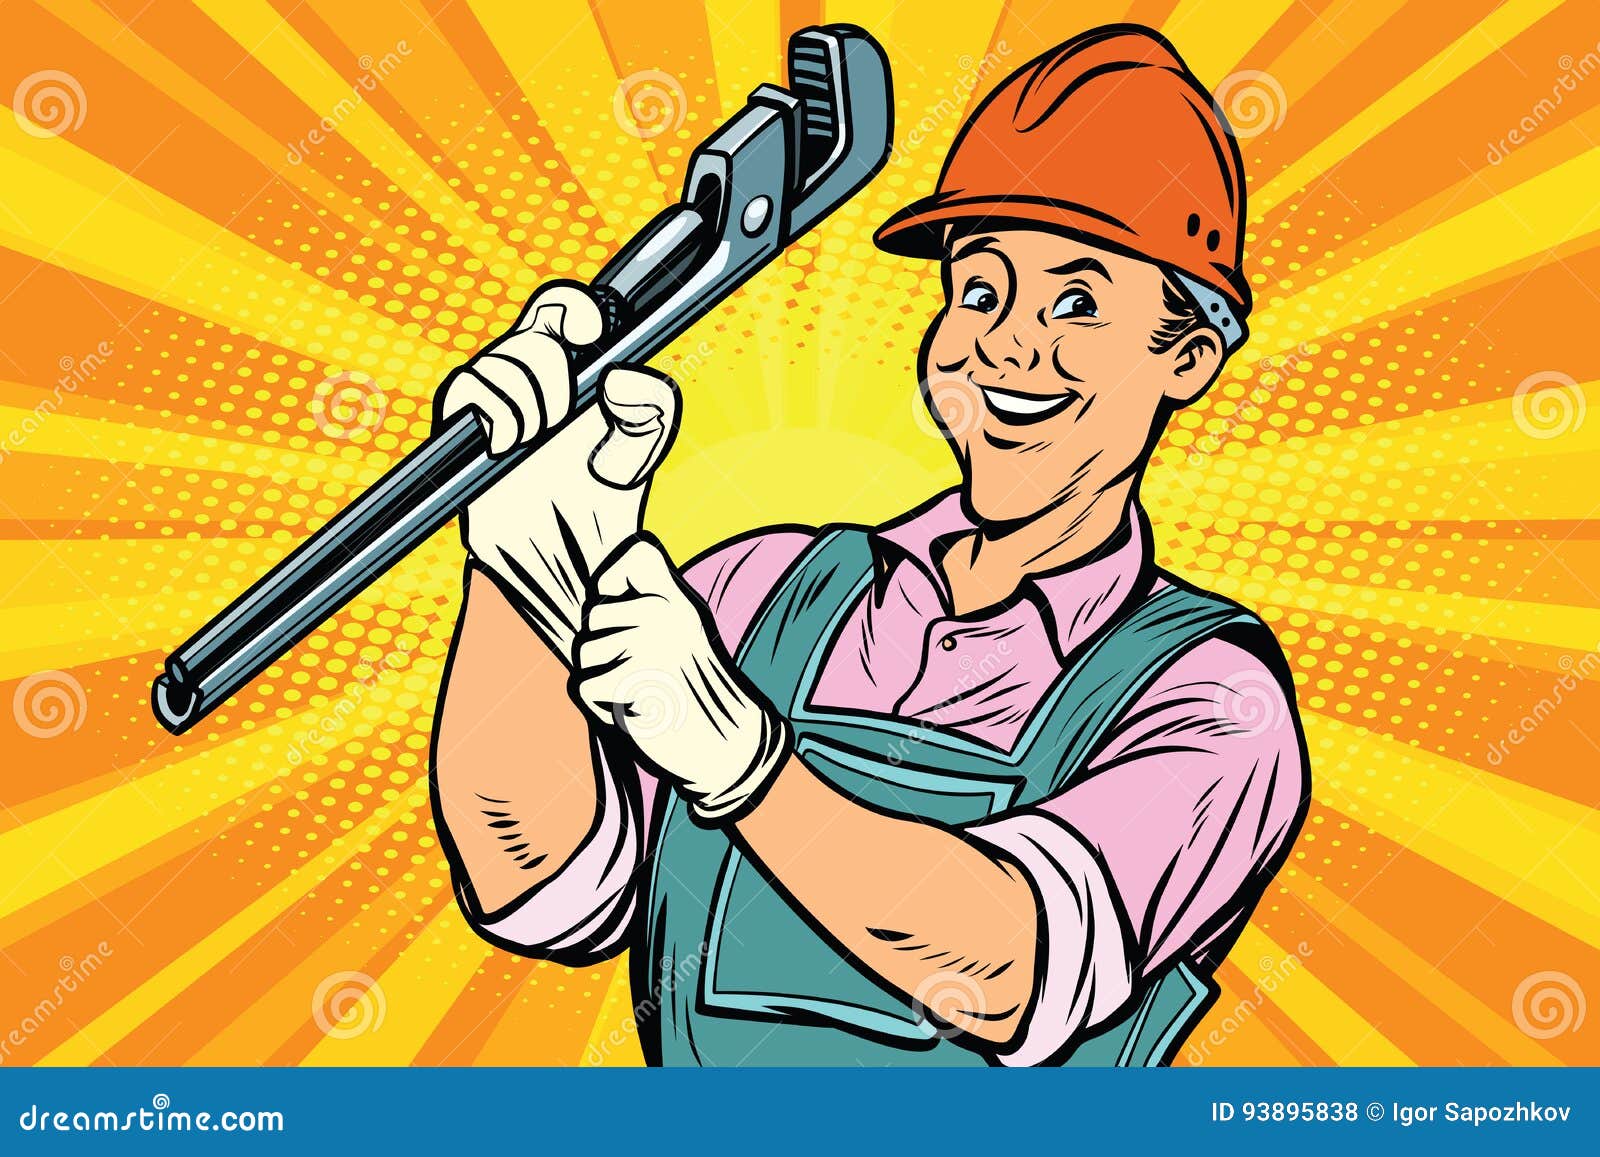 Construction Worker with Adjustable Wrench Stock Vector - Illustration ...